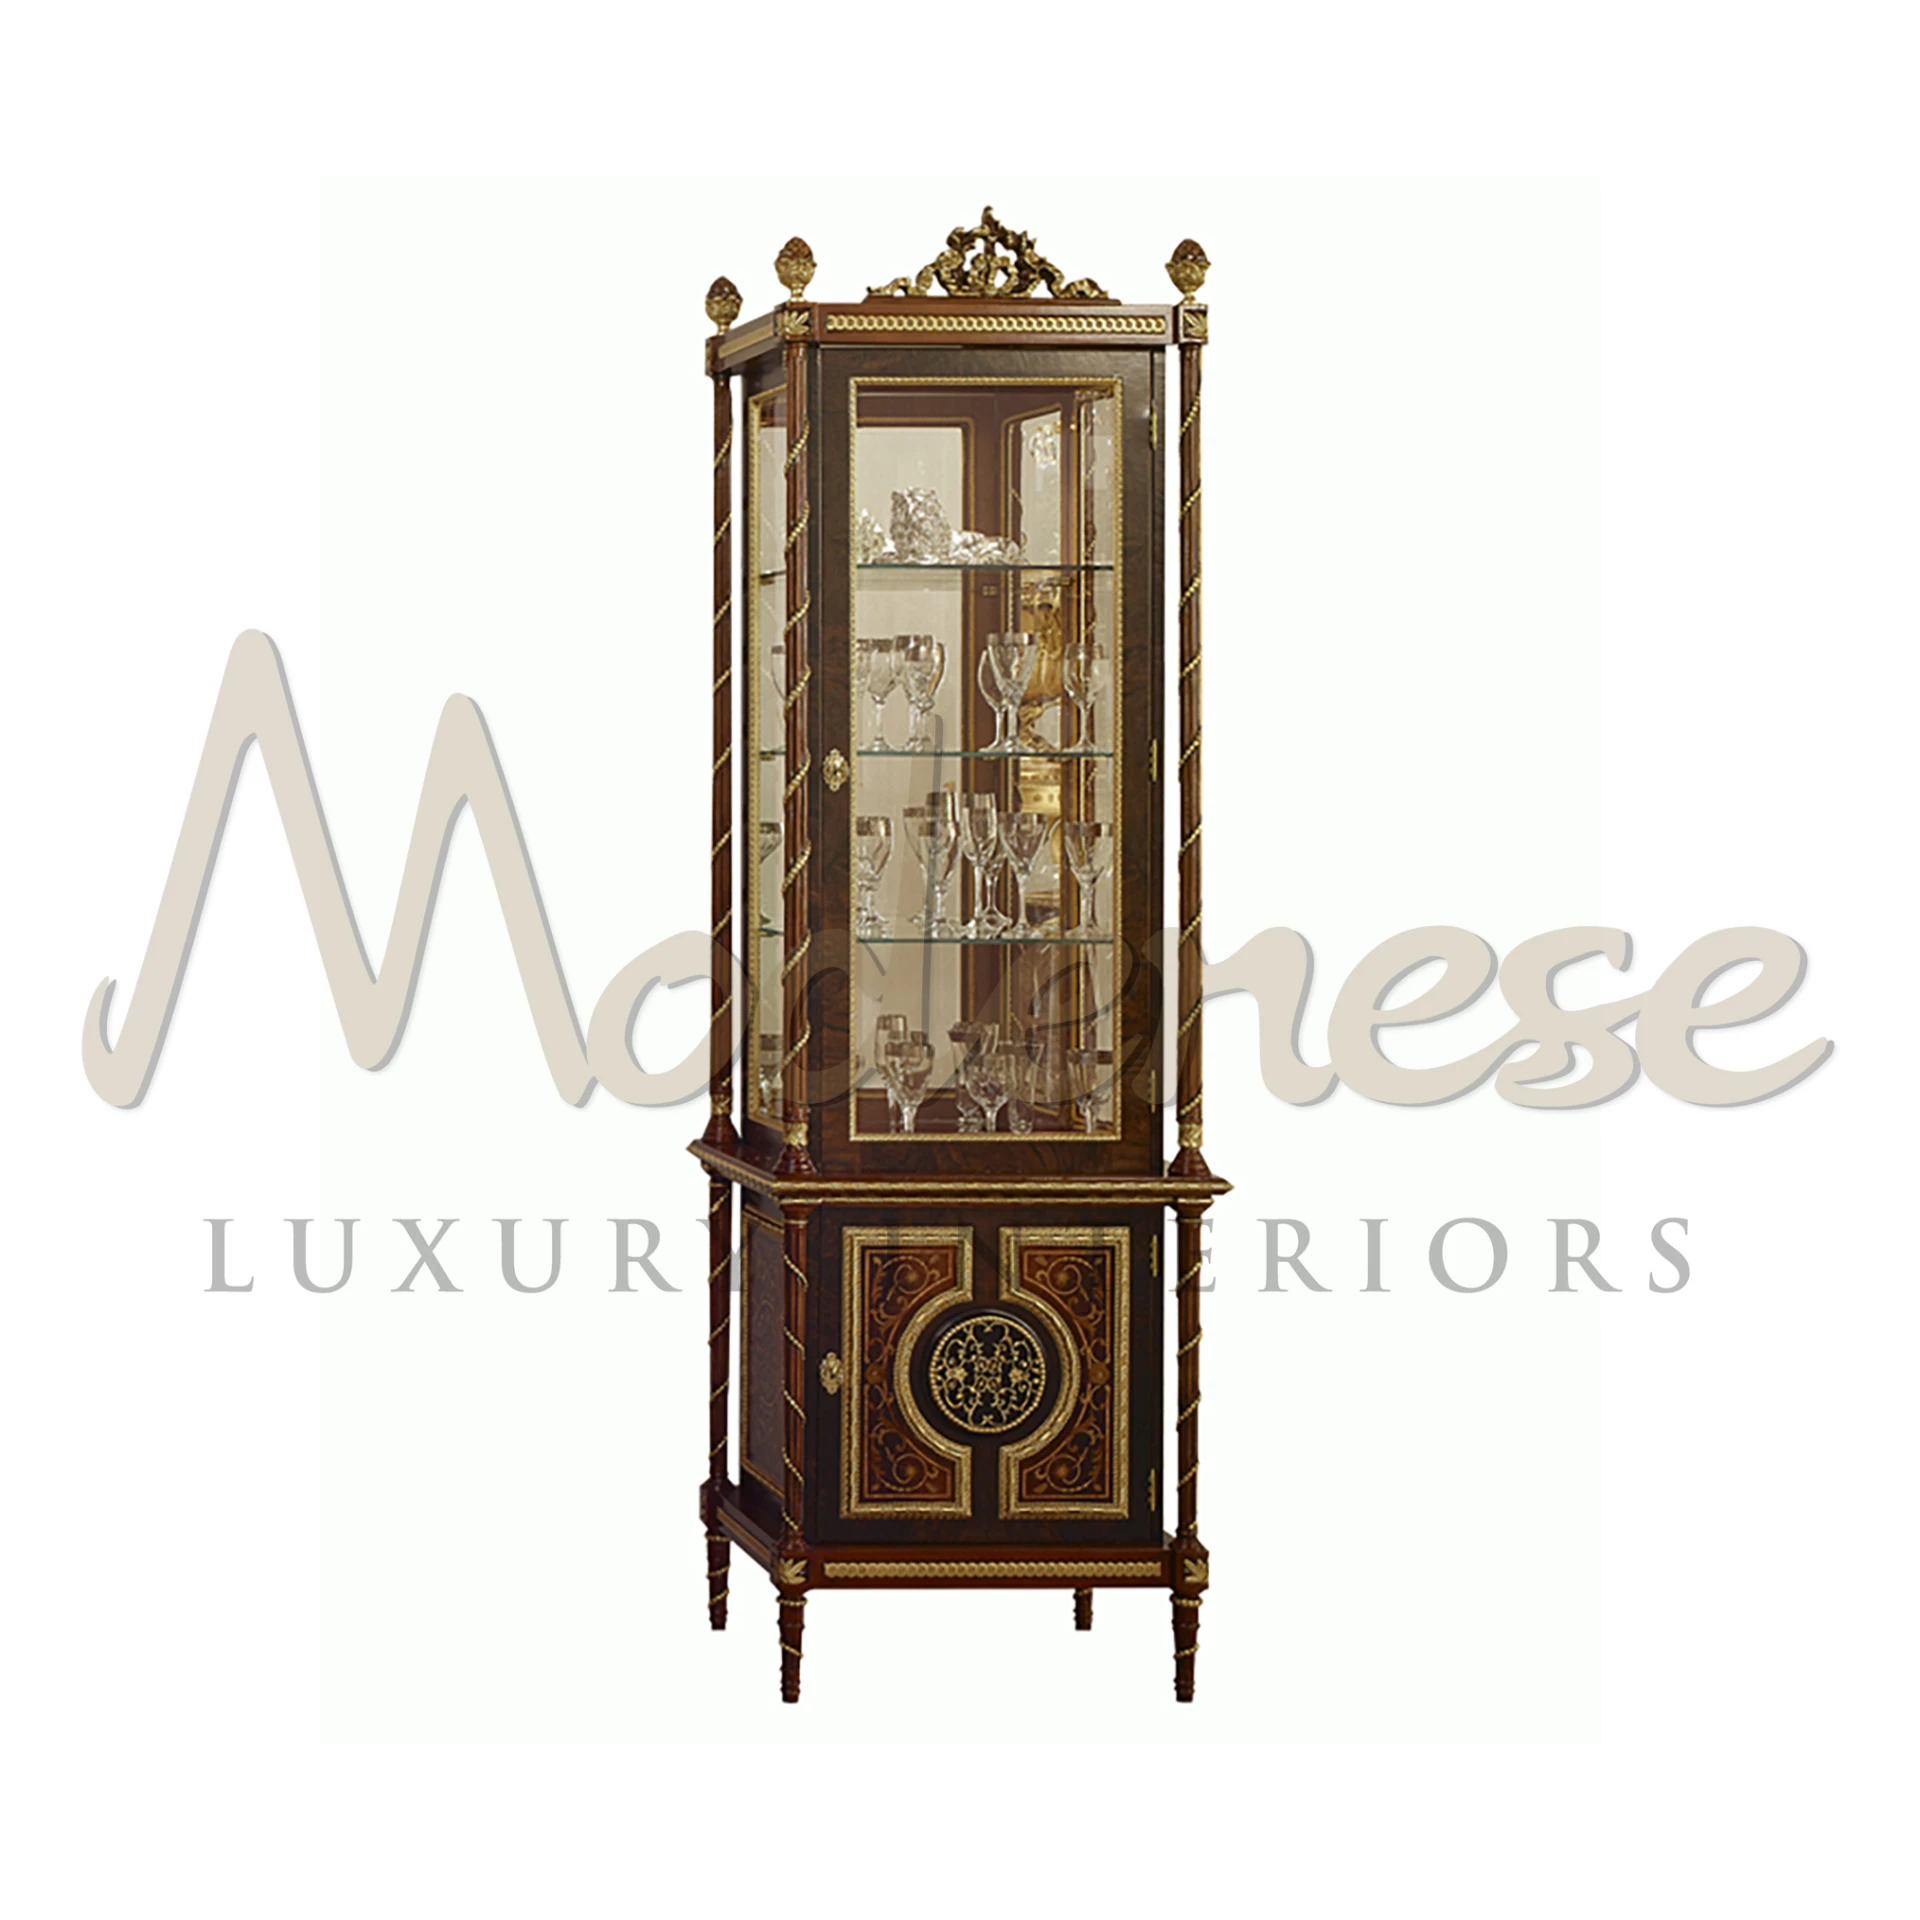 Decor your home with Modenese Luxury Interior's majestic vitrine, featuring gold leaf decorations and baroque carvings for an opulent touch.